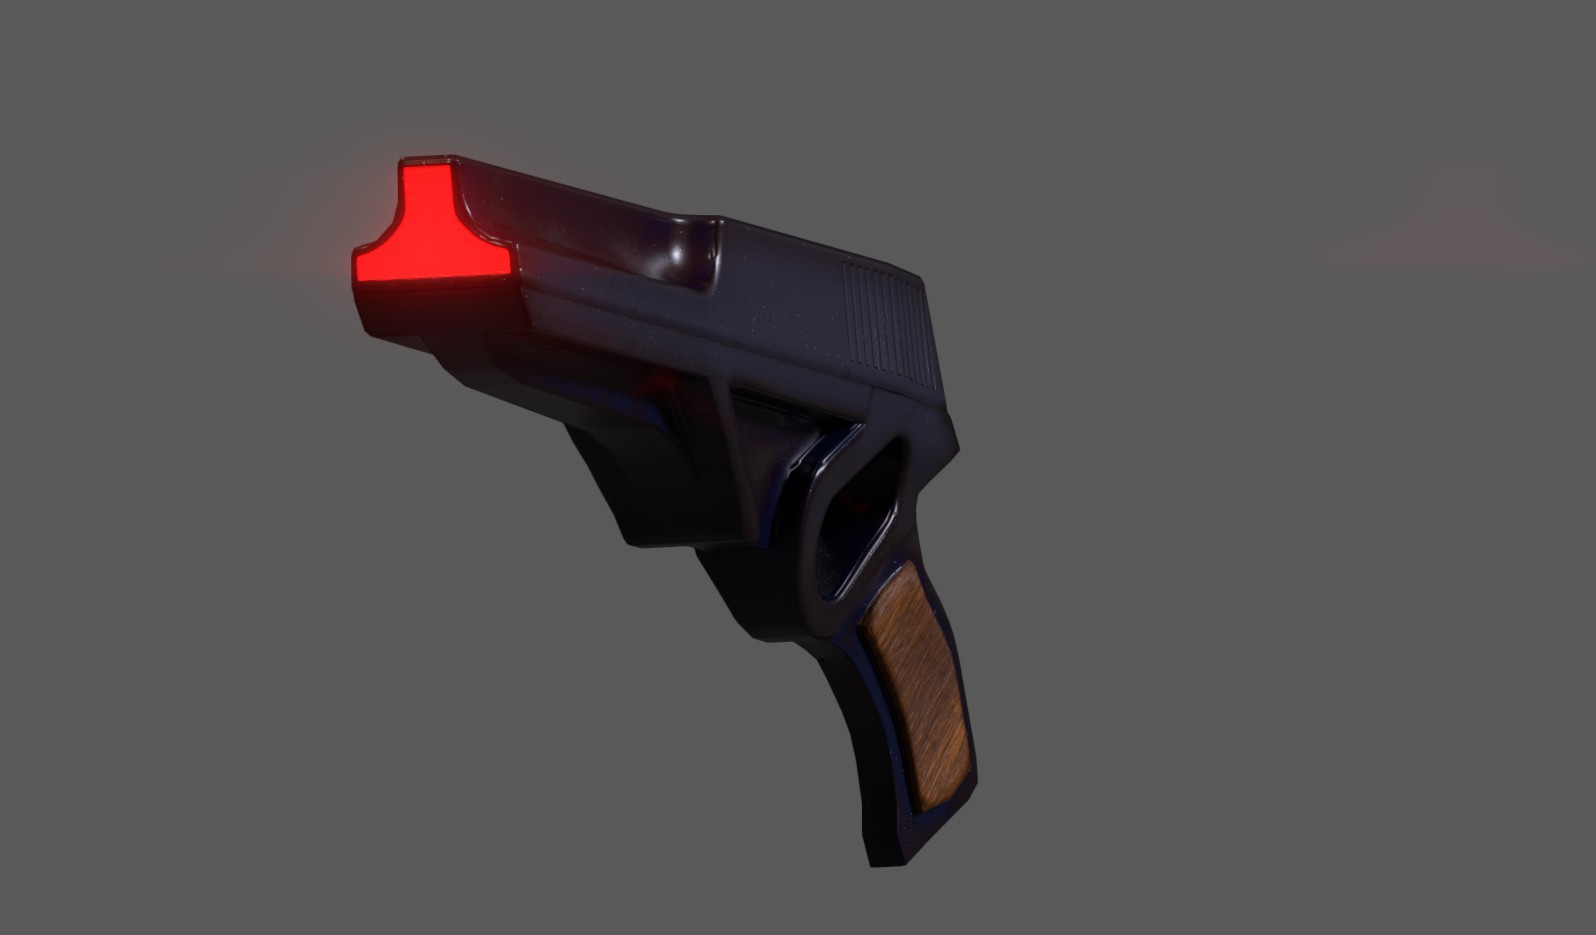 initially I wanted to have the "muzzle" as pictured above, with fully open hole tracing the perimeter of the front polygons but it left the slide feeling way to thin. 